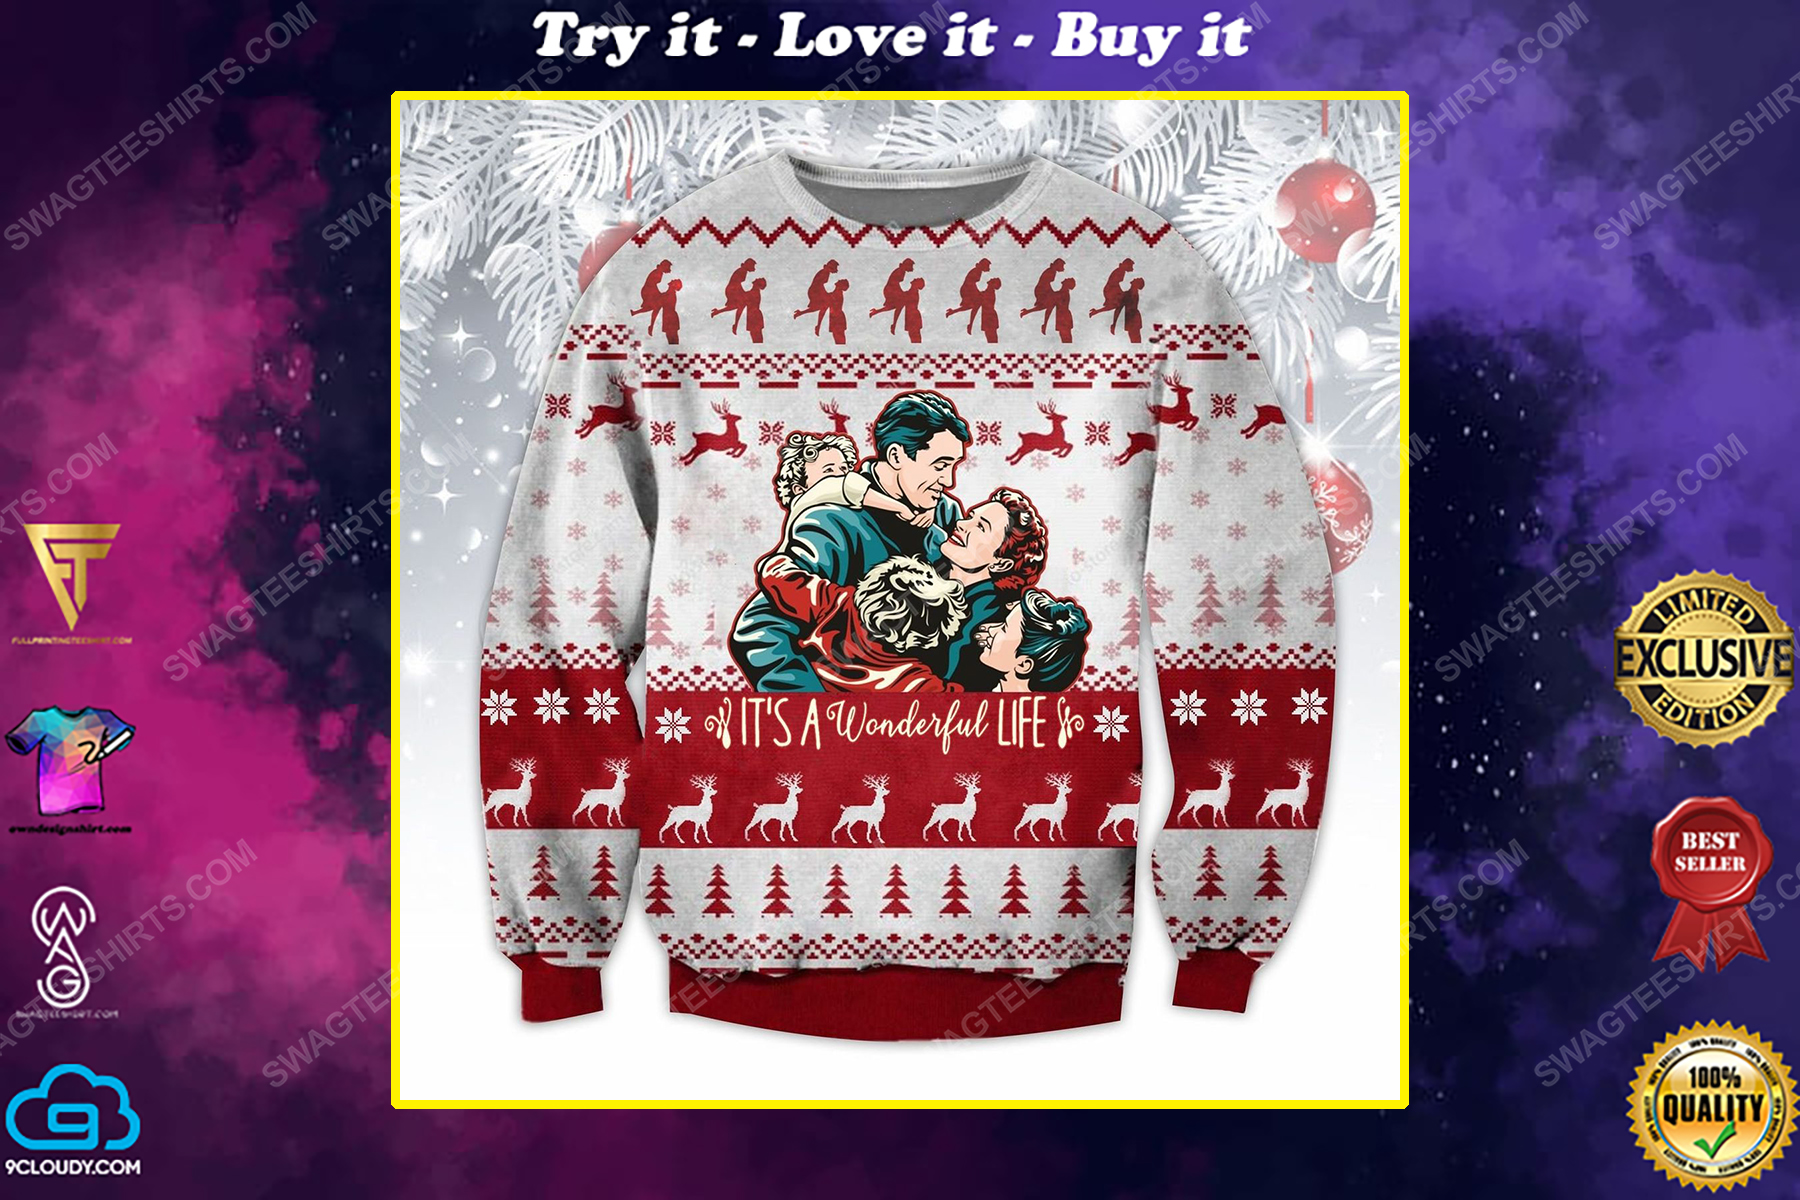 It's a wonderful life ugly christmas sweater 1